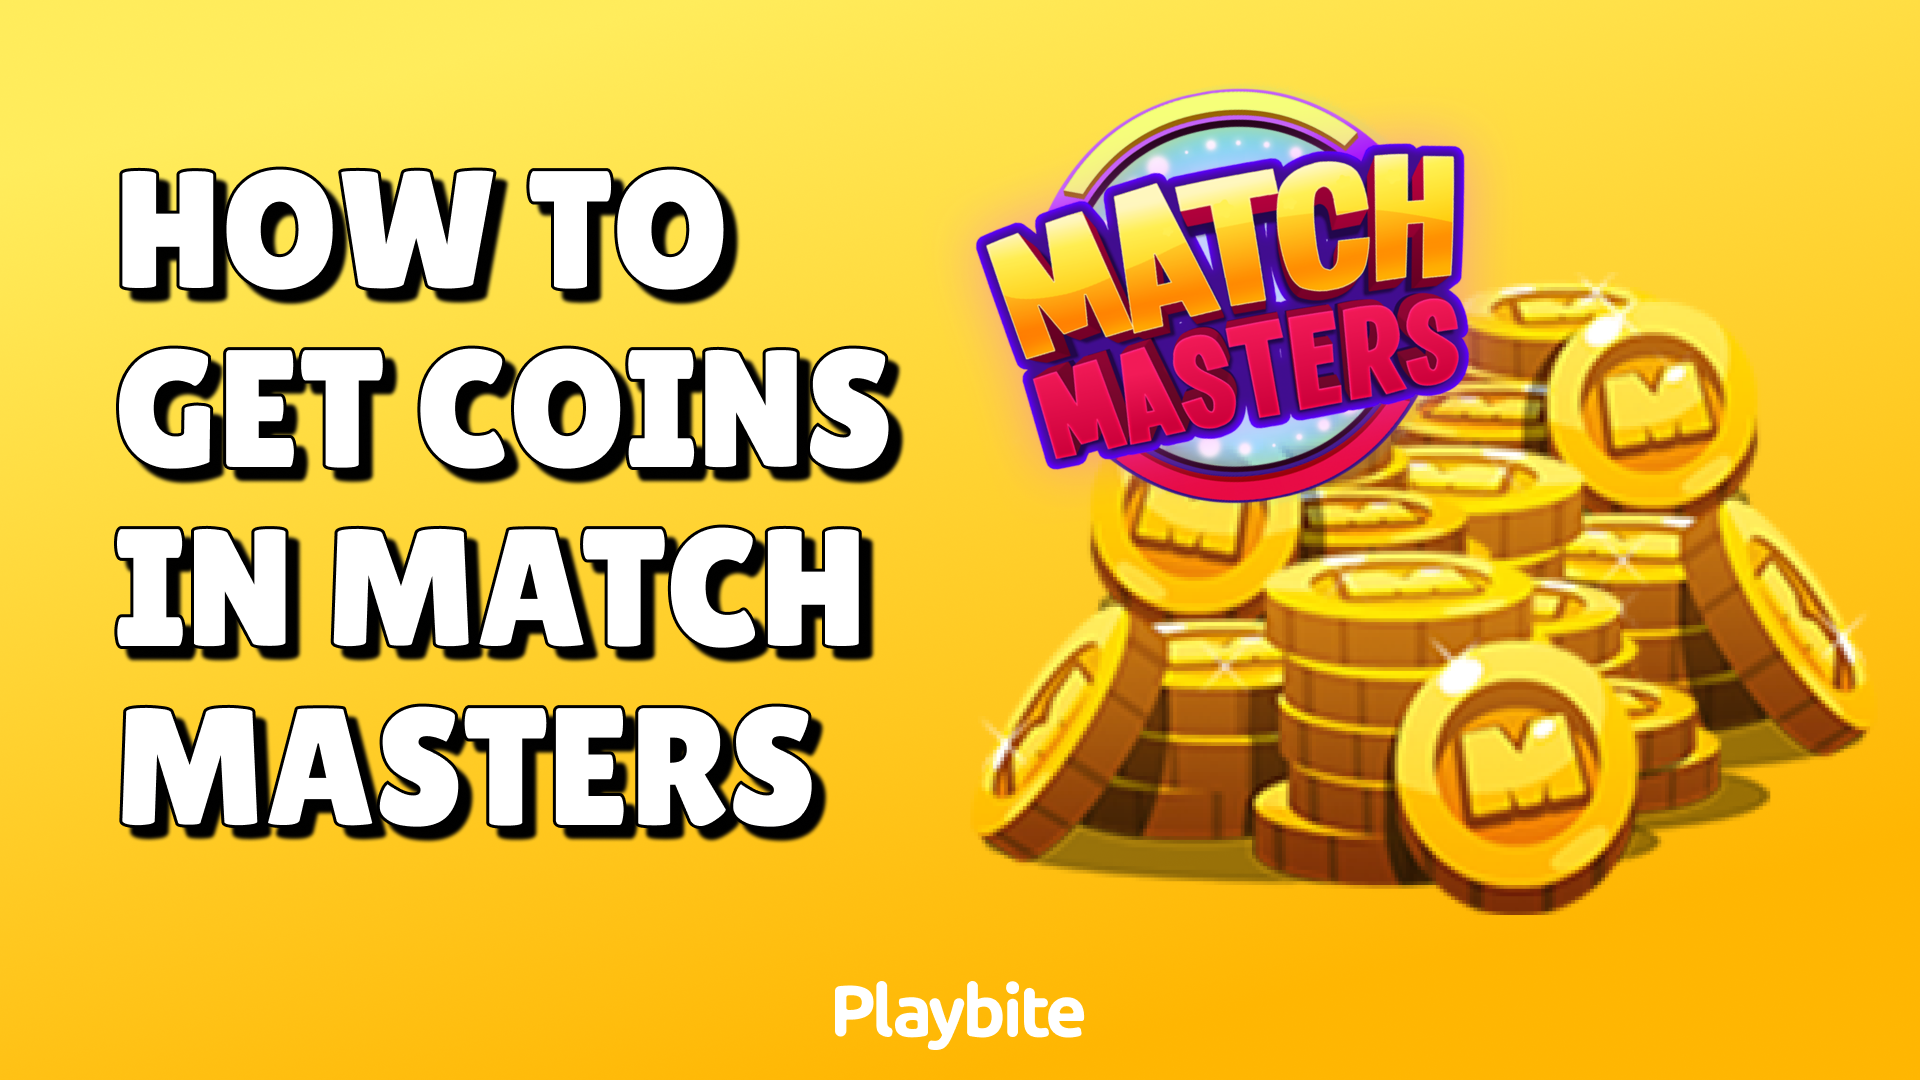 How To Get Coins In Match Masters